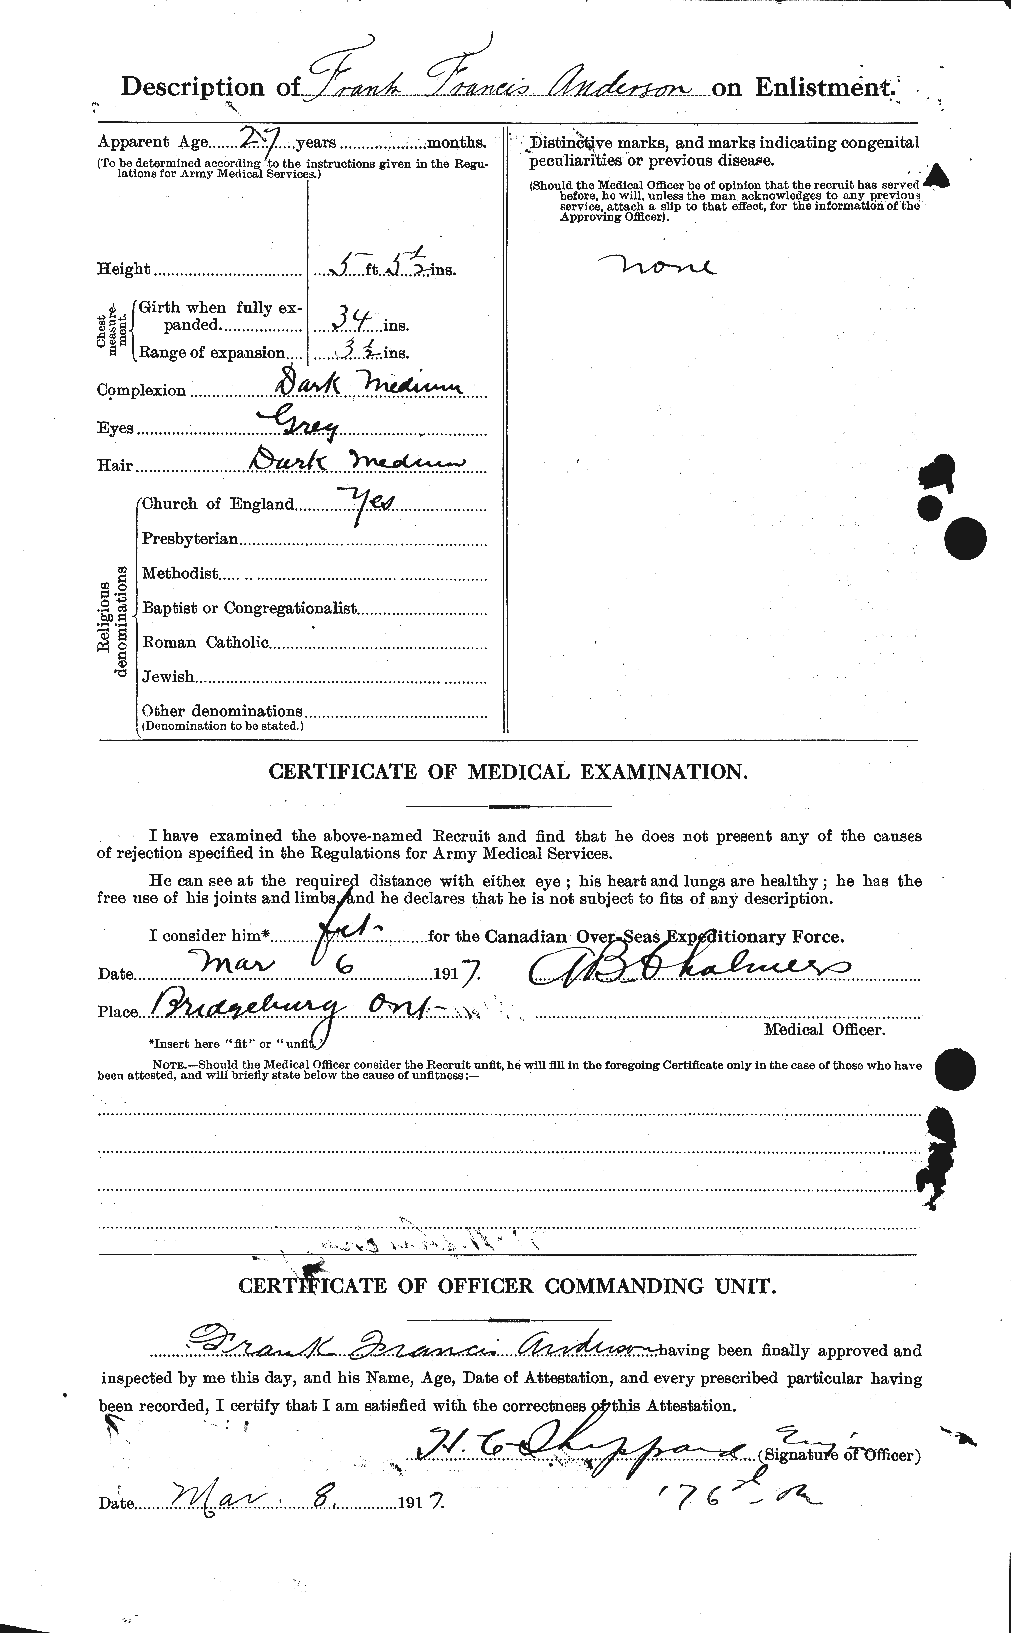 Personnel Records of the First World War - CEF 209849b